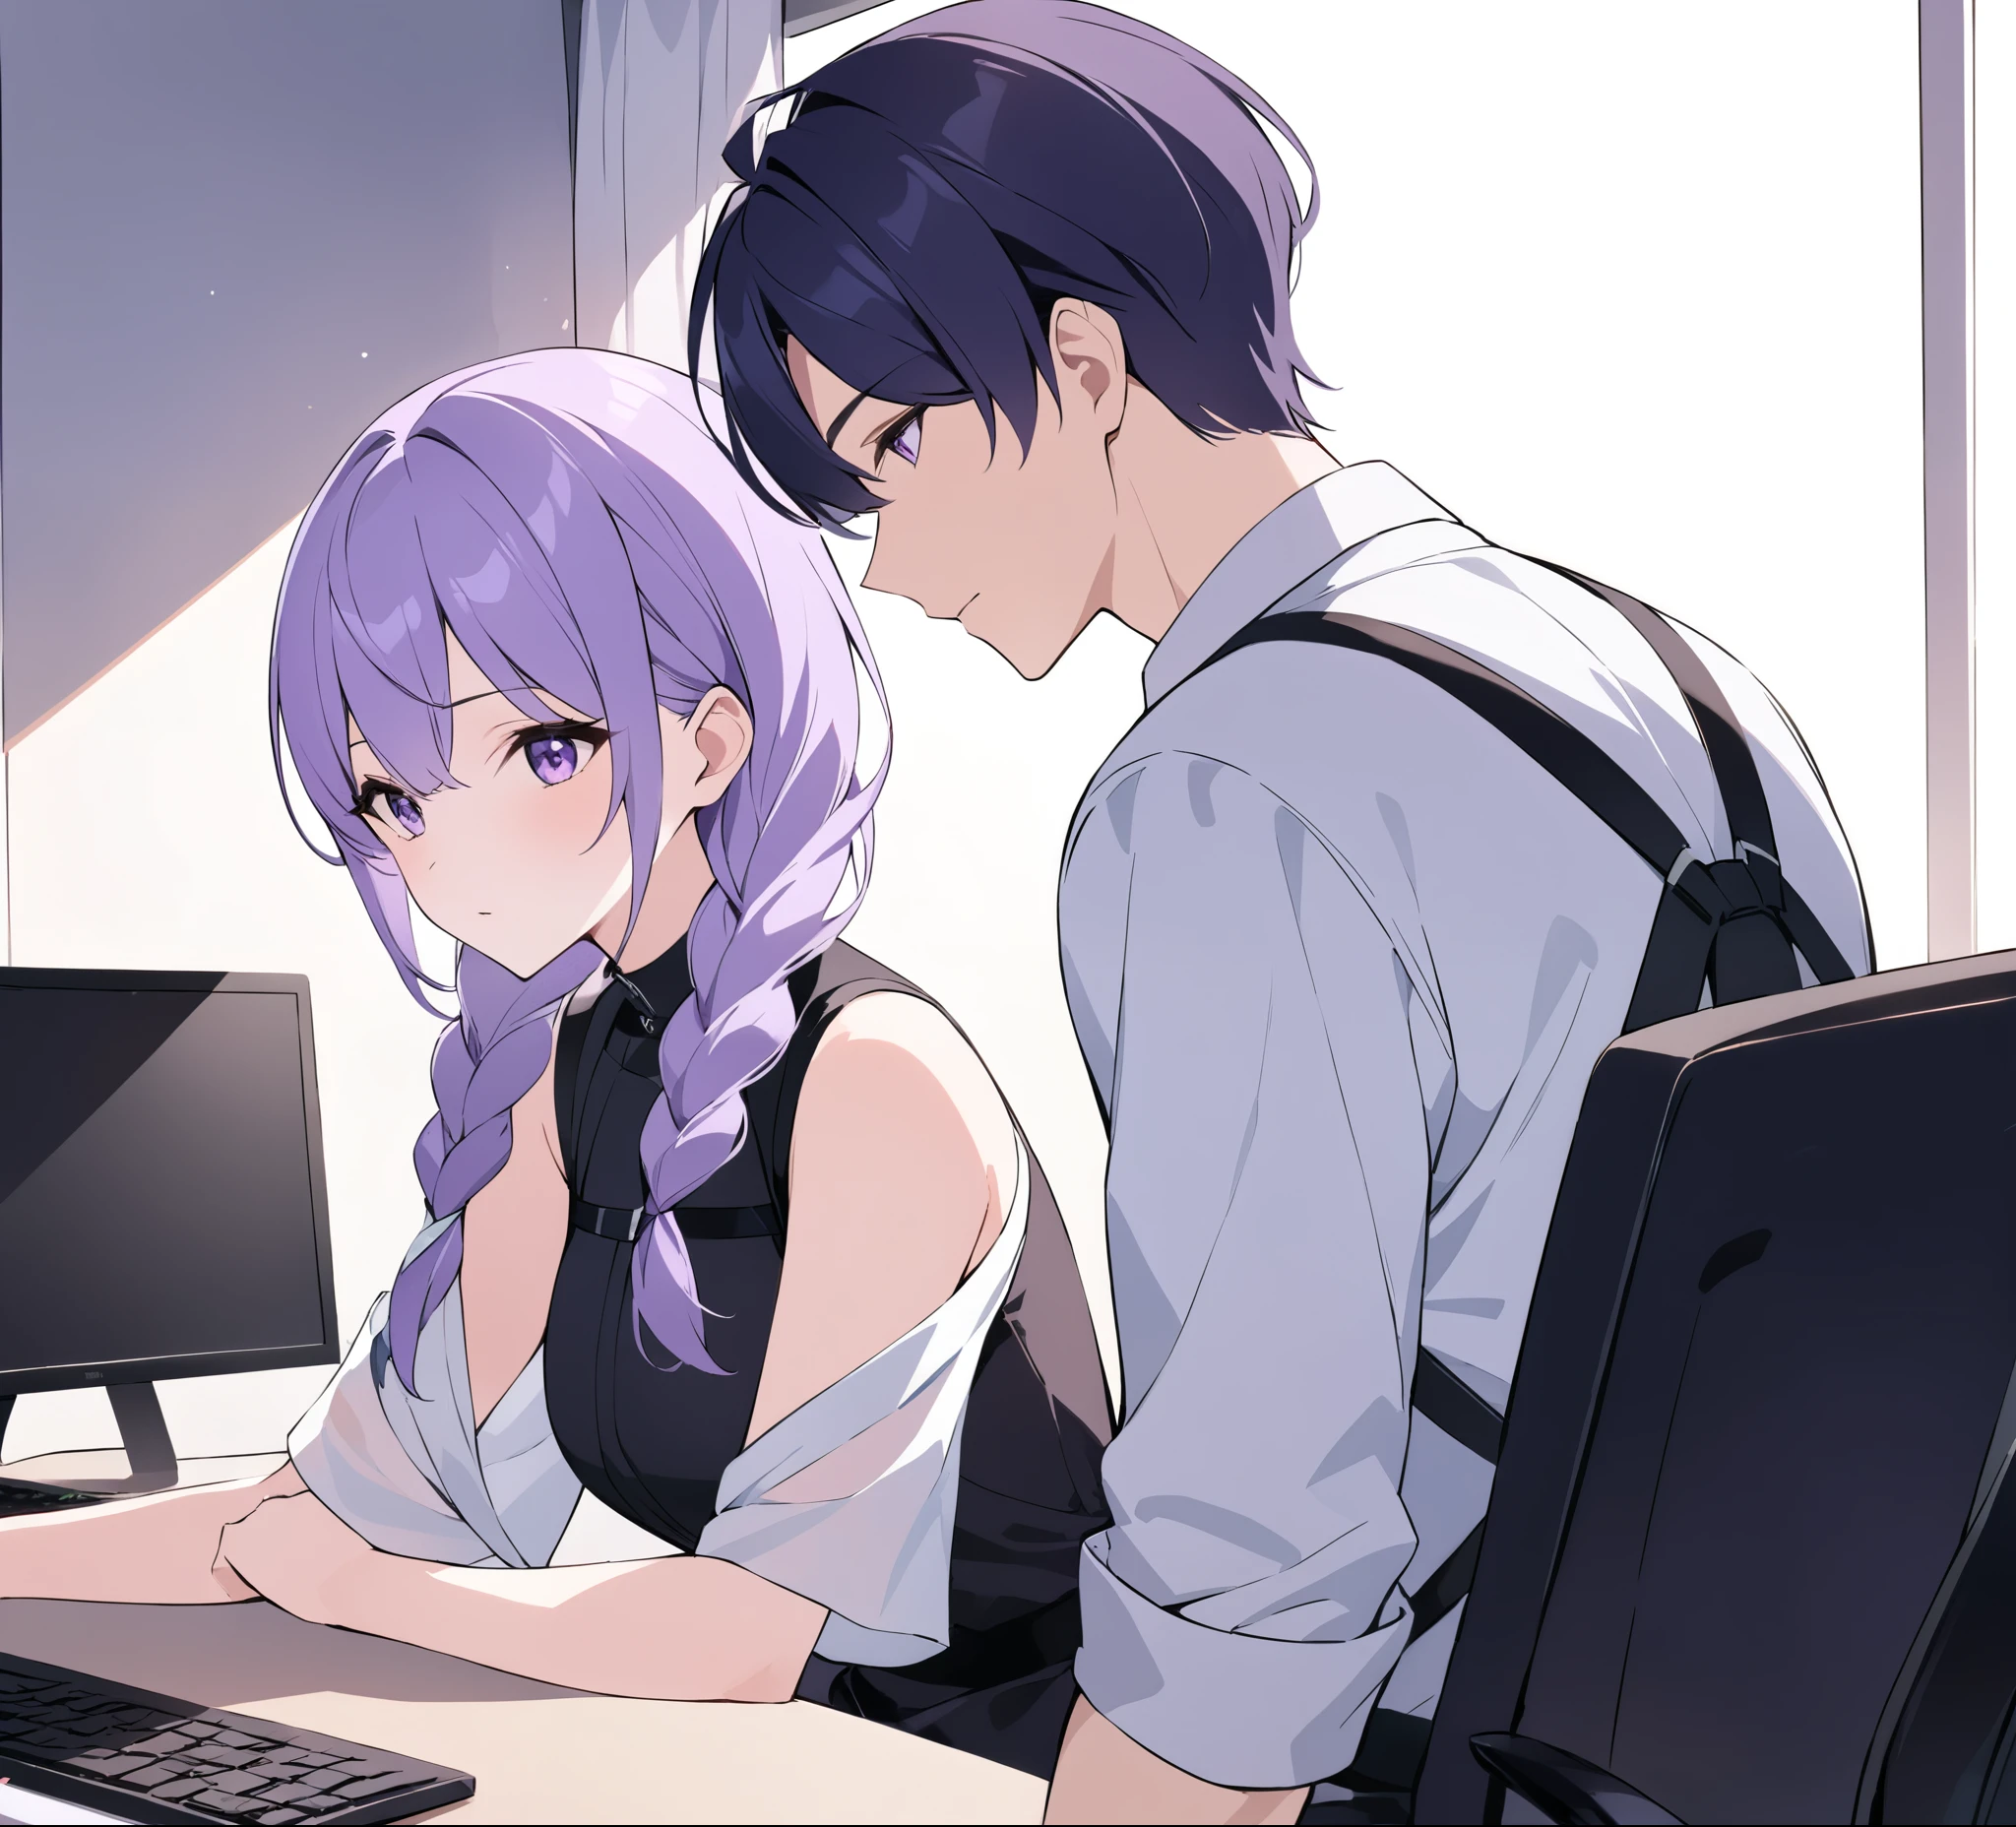 A captivating illustration portraying a blossoming romance between a man and a woman((1 male, 1 woman with purple and white gradient double braids)) in the office. The art form resembles a subtle and sophisticated digital painting, capturing the nuances of their relationship. The scene is set in a modern office space, with sleek desks, computers, and a backdrop of bustling professionals. The man and woman are seated close to each other, engrossed in a heartfelt conversation. Their body language exudes warmth and familiarity, hinting at their connection. Soft, natural lighting fills the room, creating a warm and inviting atmosphere. The overall result is a tender depiction of an office romance, showcasing the delicate balance between work and love in a professional setting.